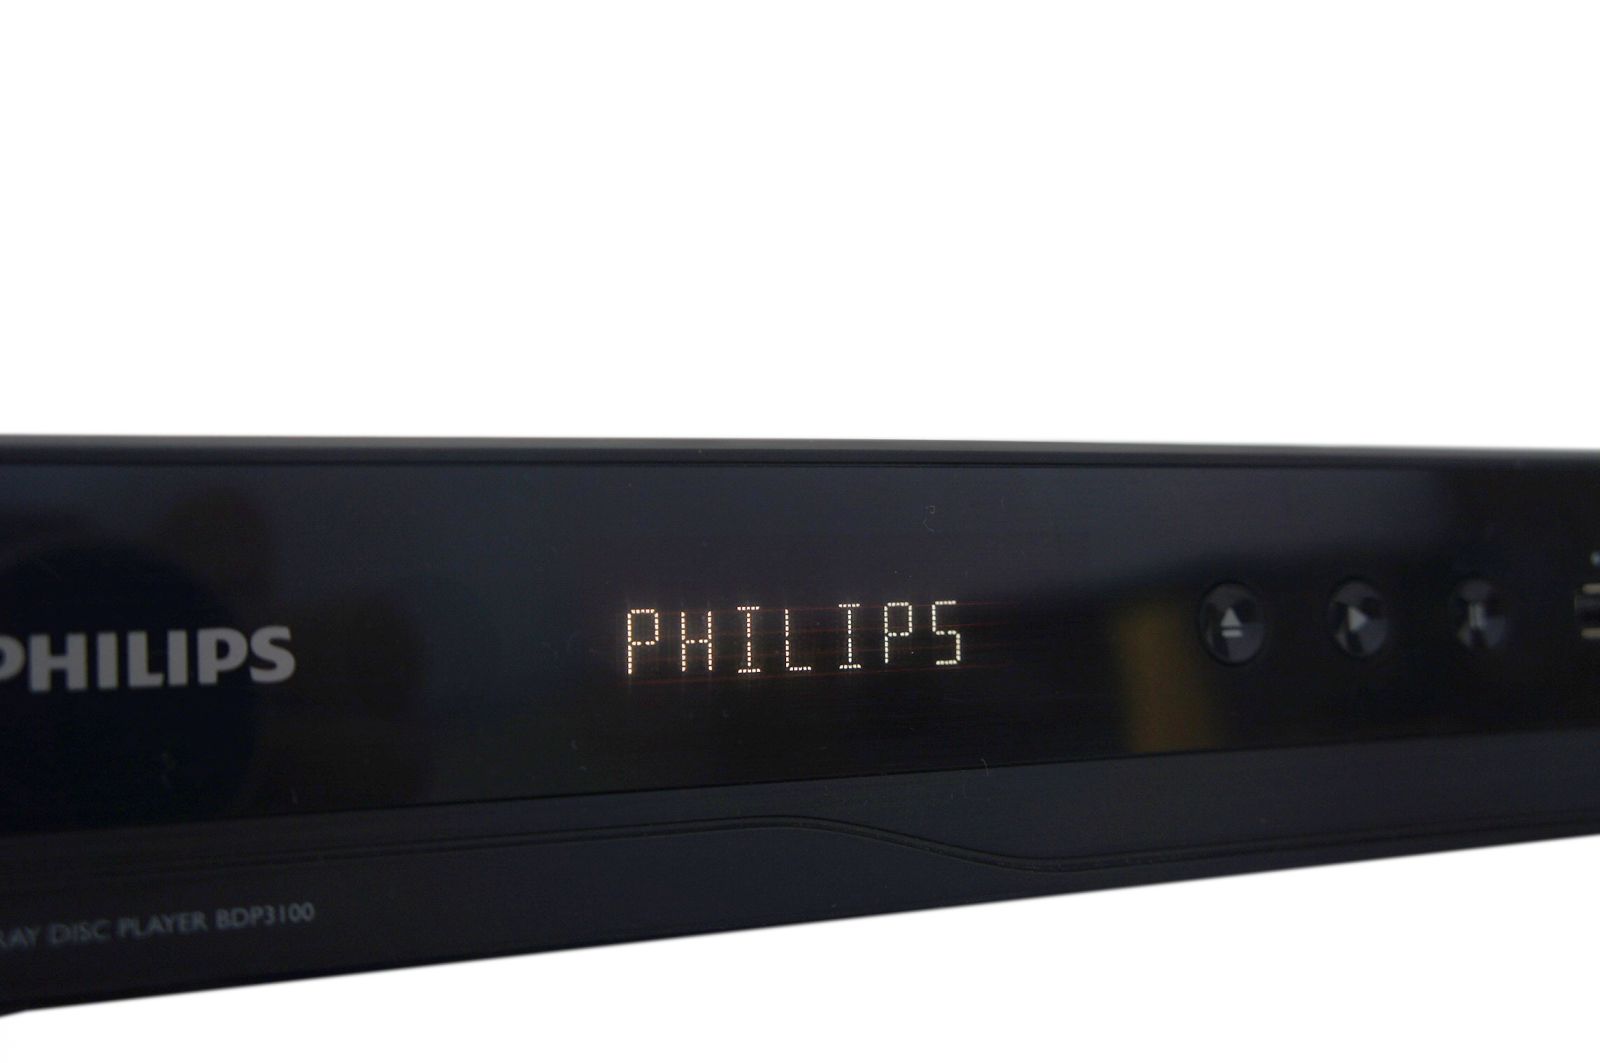 Philips_BDP3100-12_Blu_Ray_Player_02